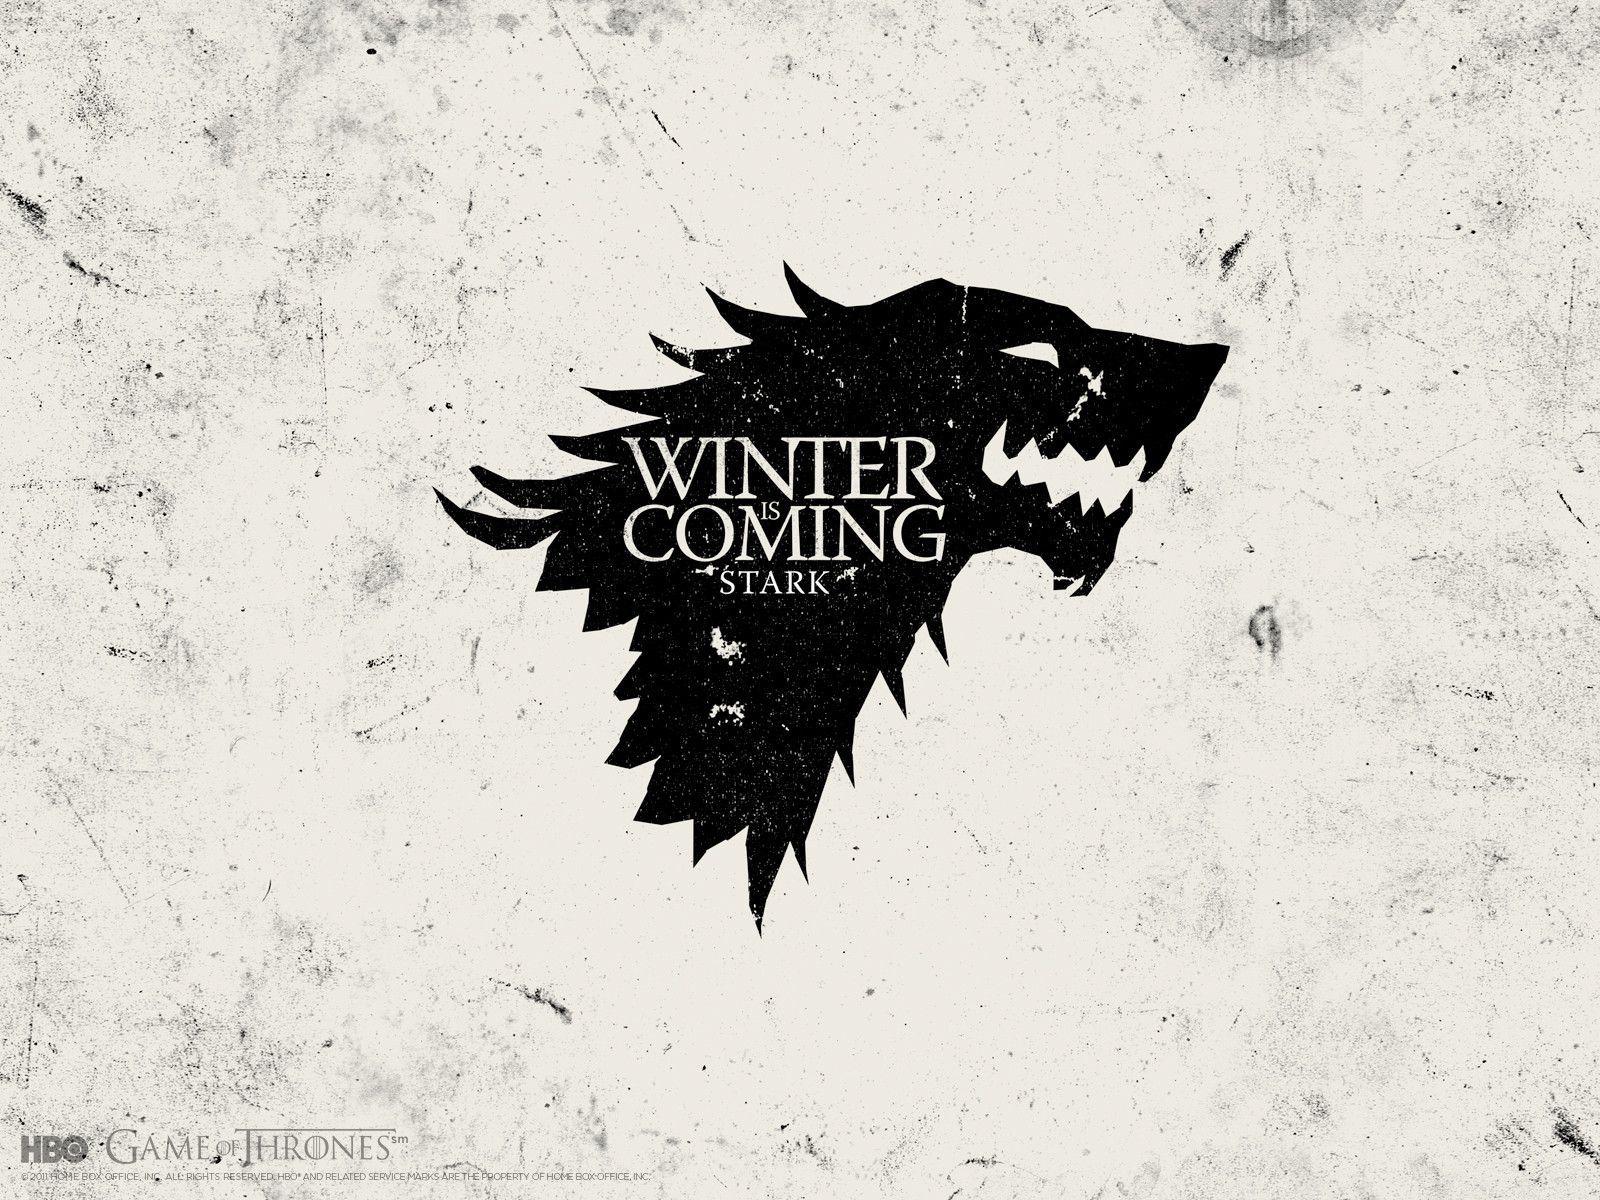 House Stark Wallpaper (Picture)